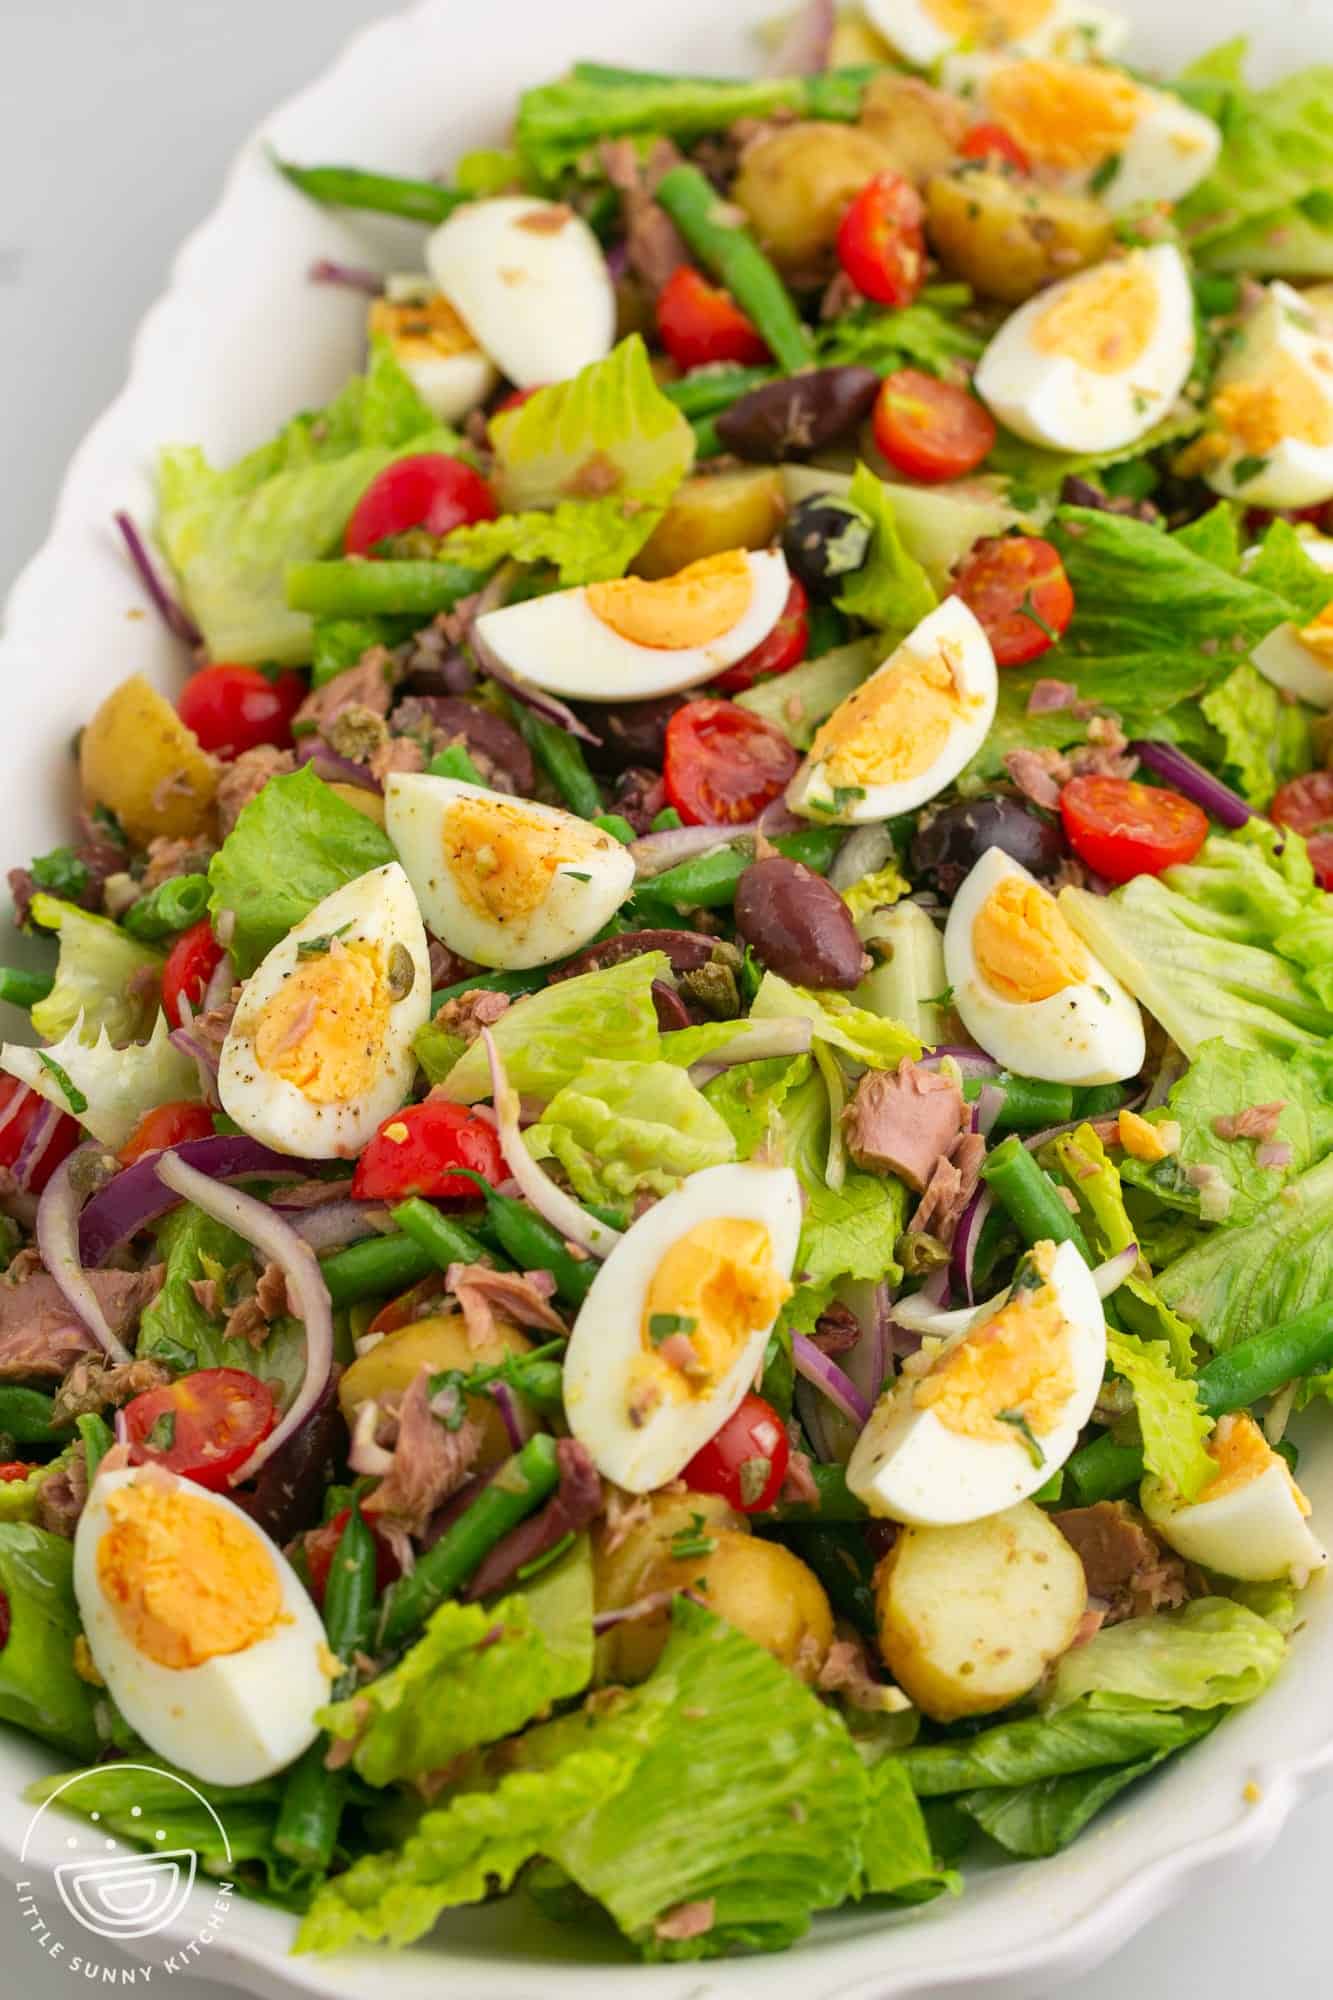 nicoise salad that has been tossed and served on a platter.